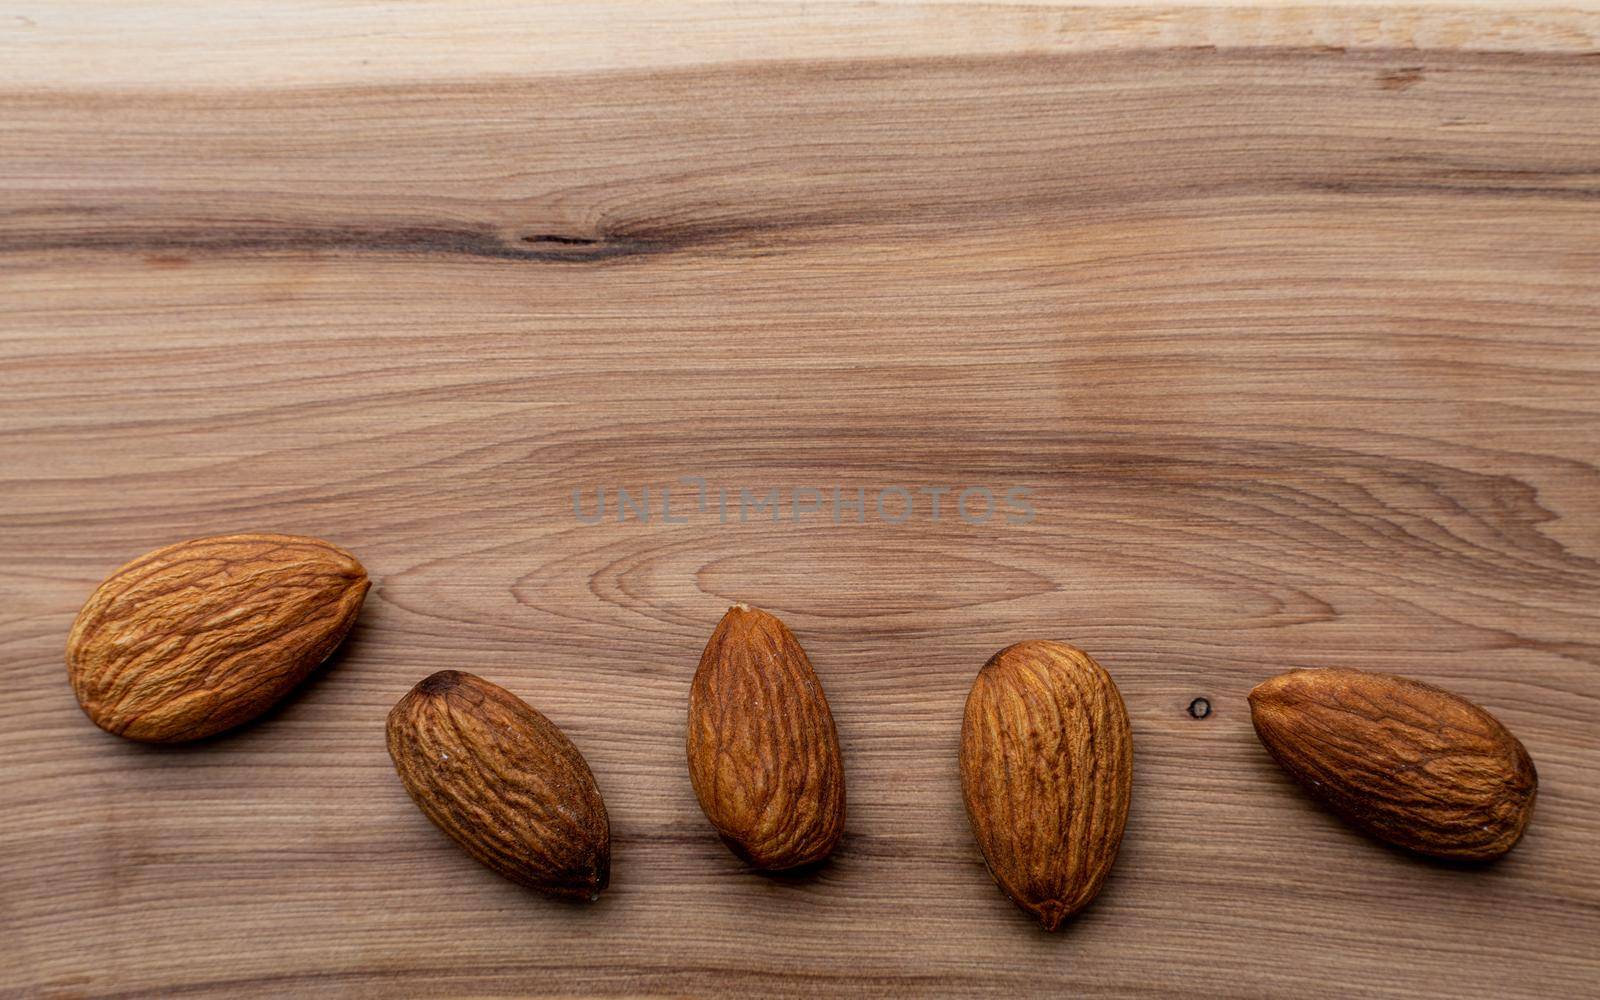 Almonds taken in close-up on a wooden background. Healthy eating and vegetarianism. The concept of healthy lifestyle